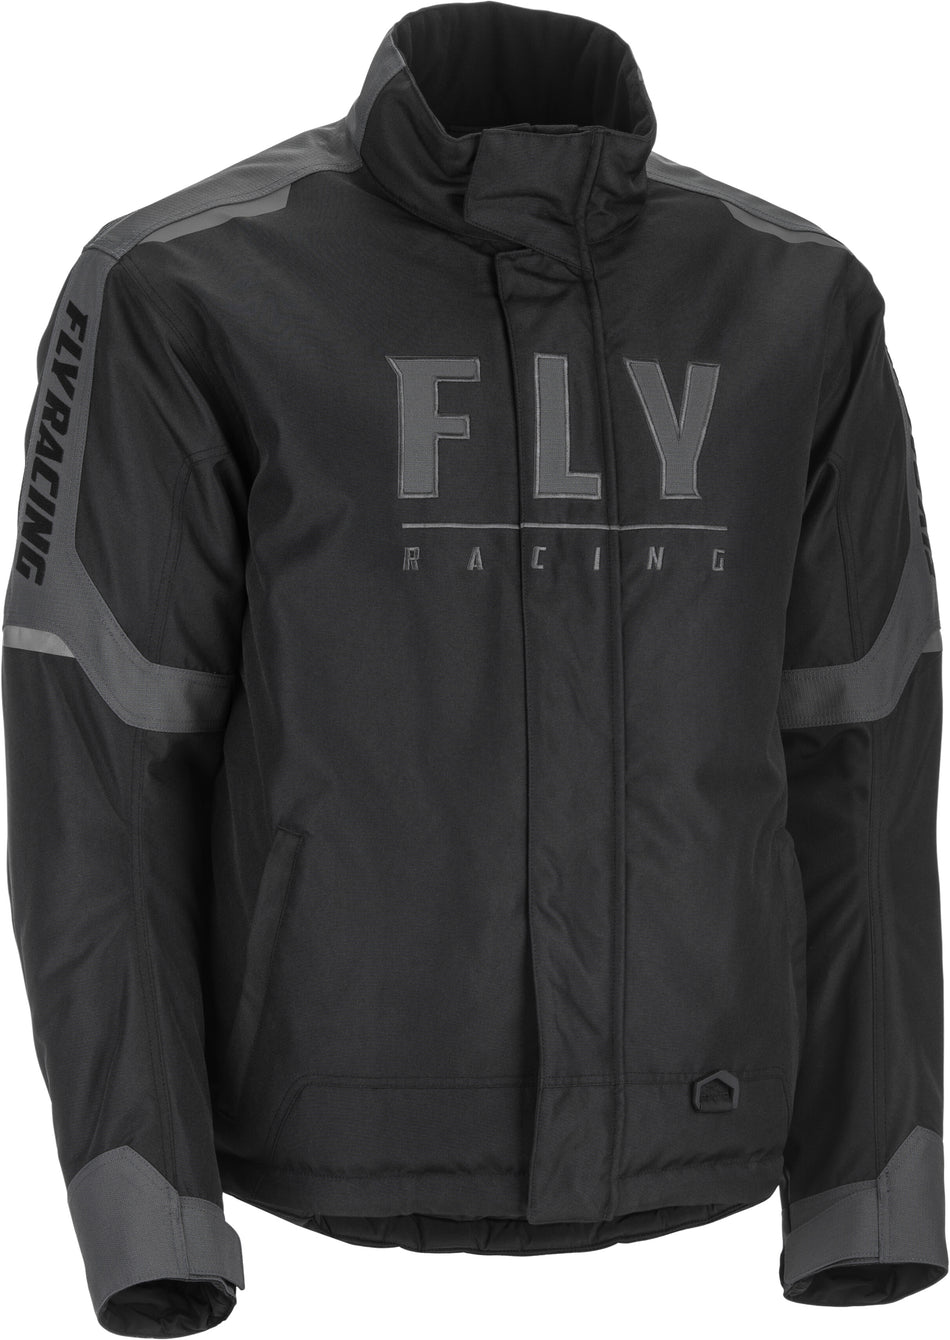 FLY RACING Outpost Jacket Black/Grey 5x 470-41405X